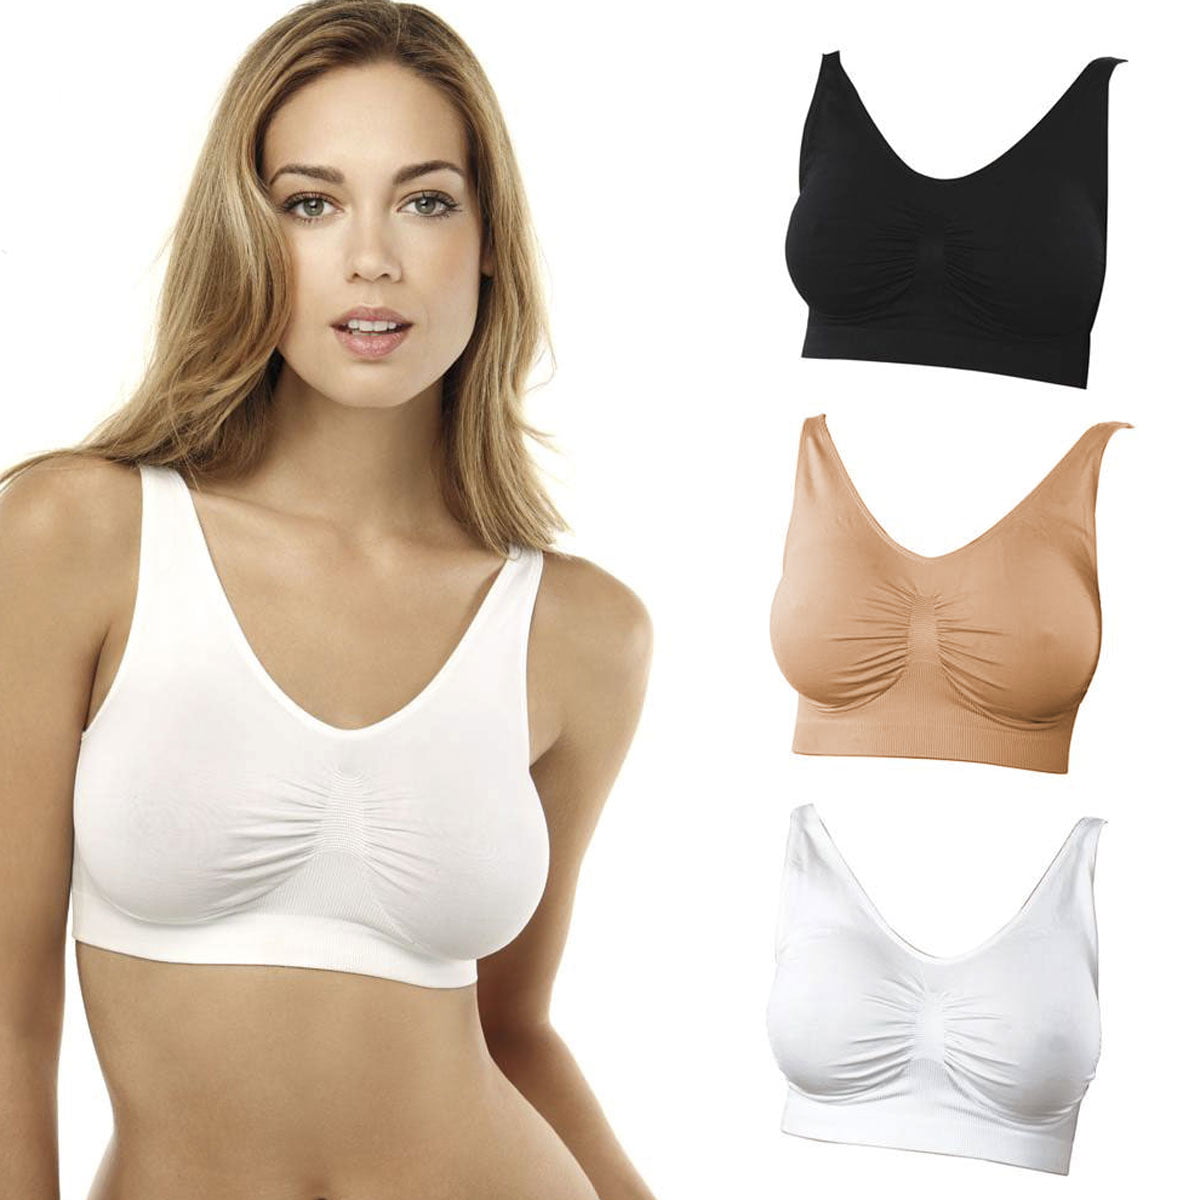 Souminie Pack of 3 Full-Coverage Comfort Fit Bras SLY931-3PC-MG